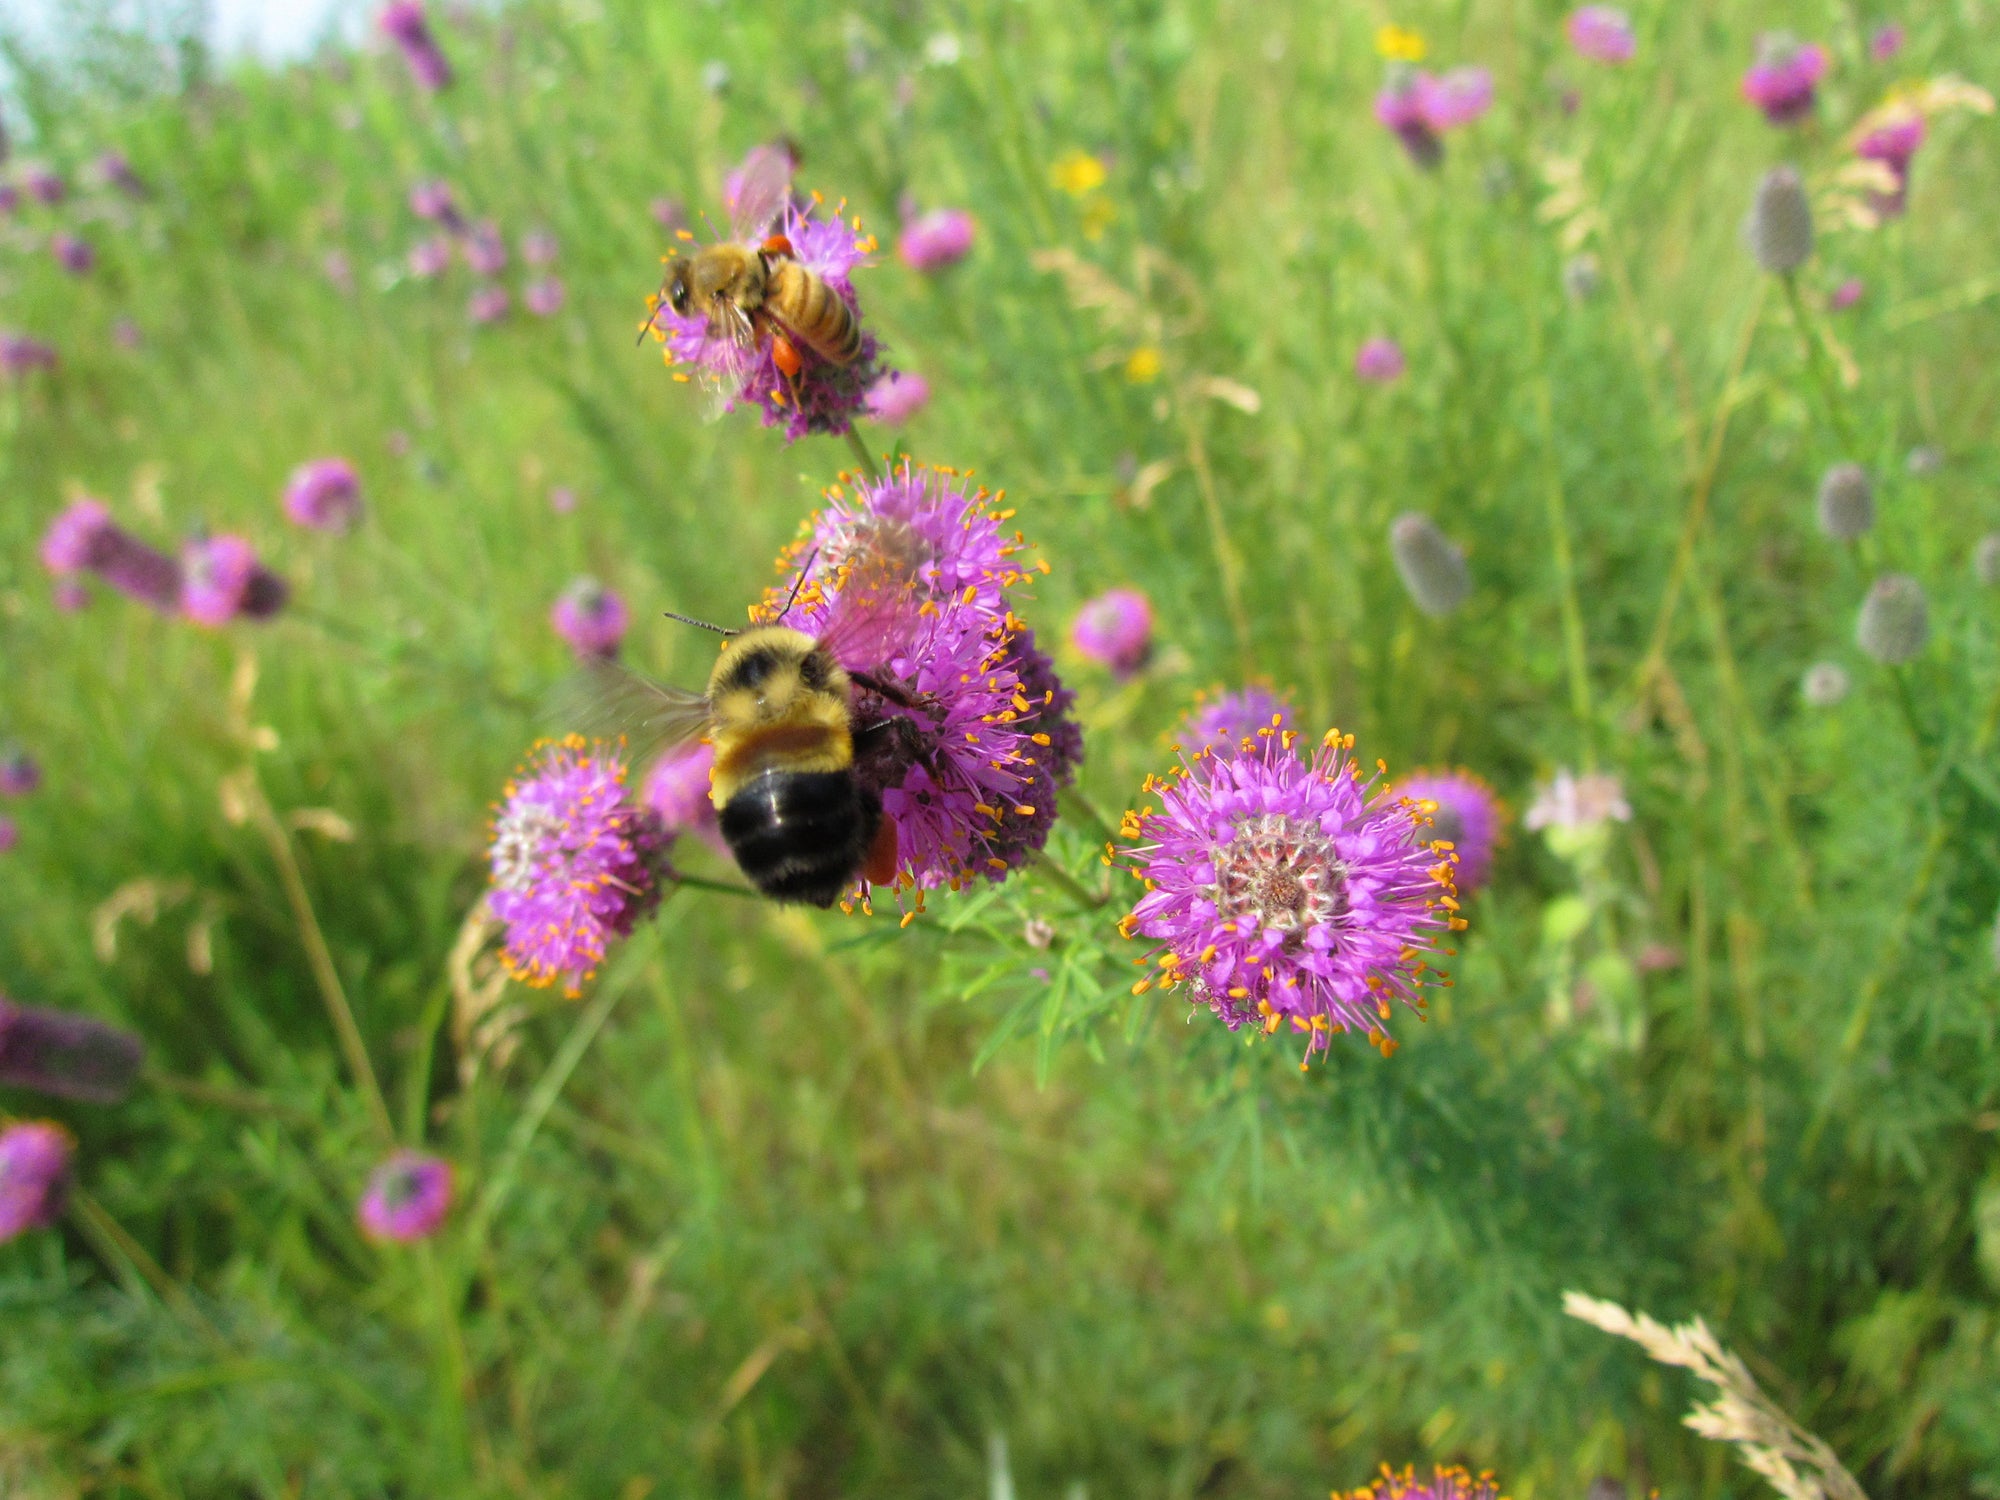 A bumblebee resting on a flower. End of image description. 